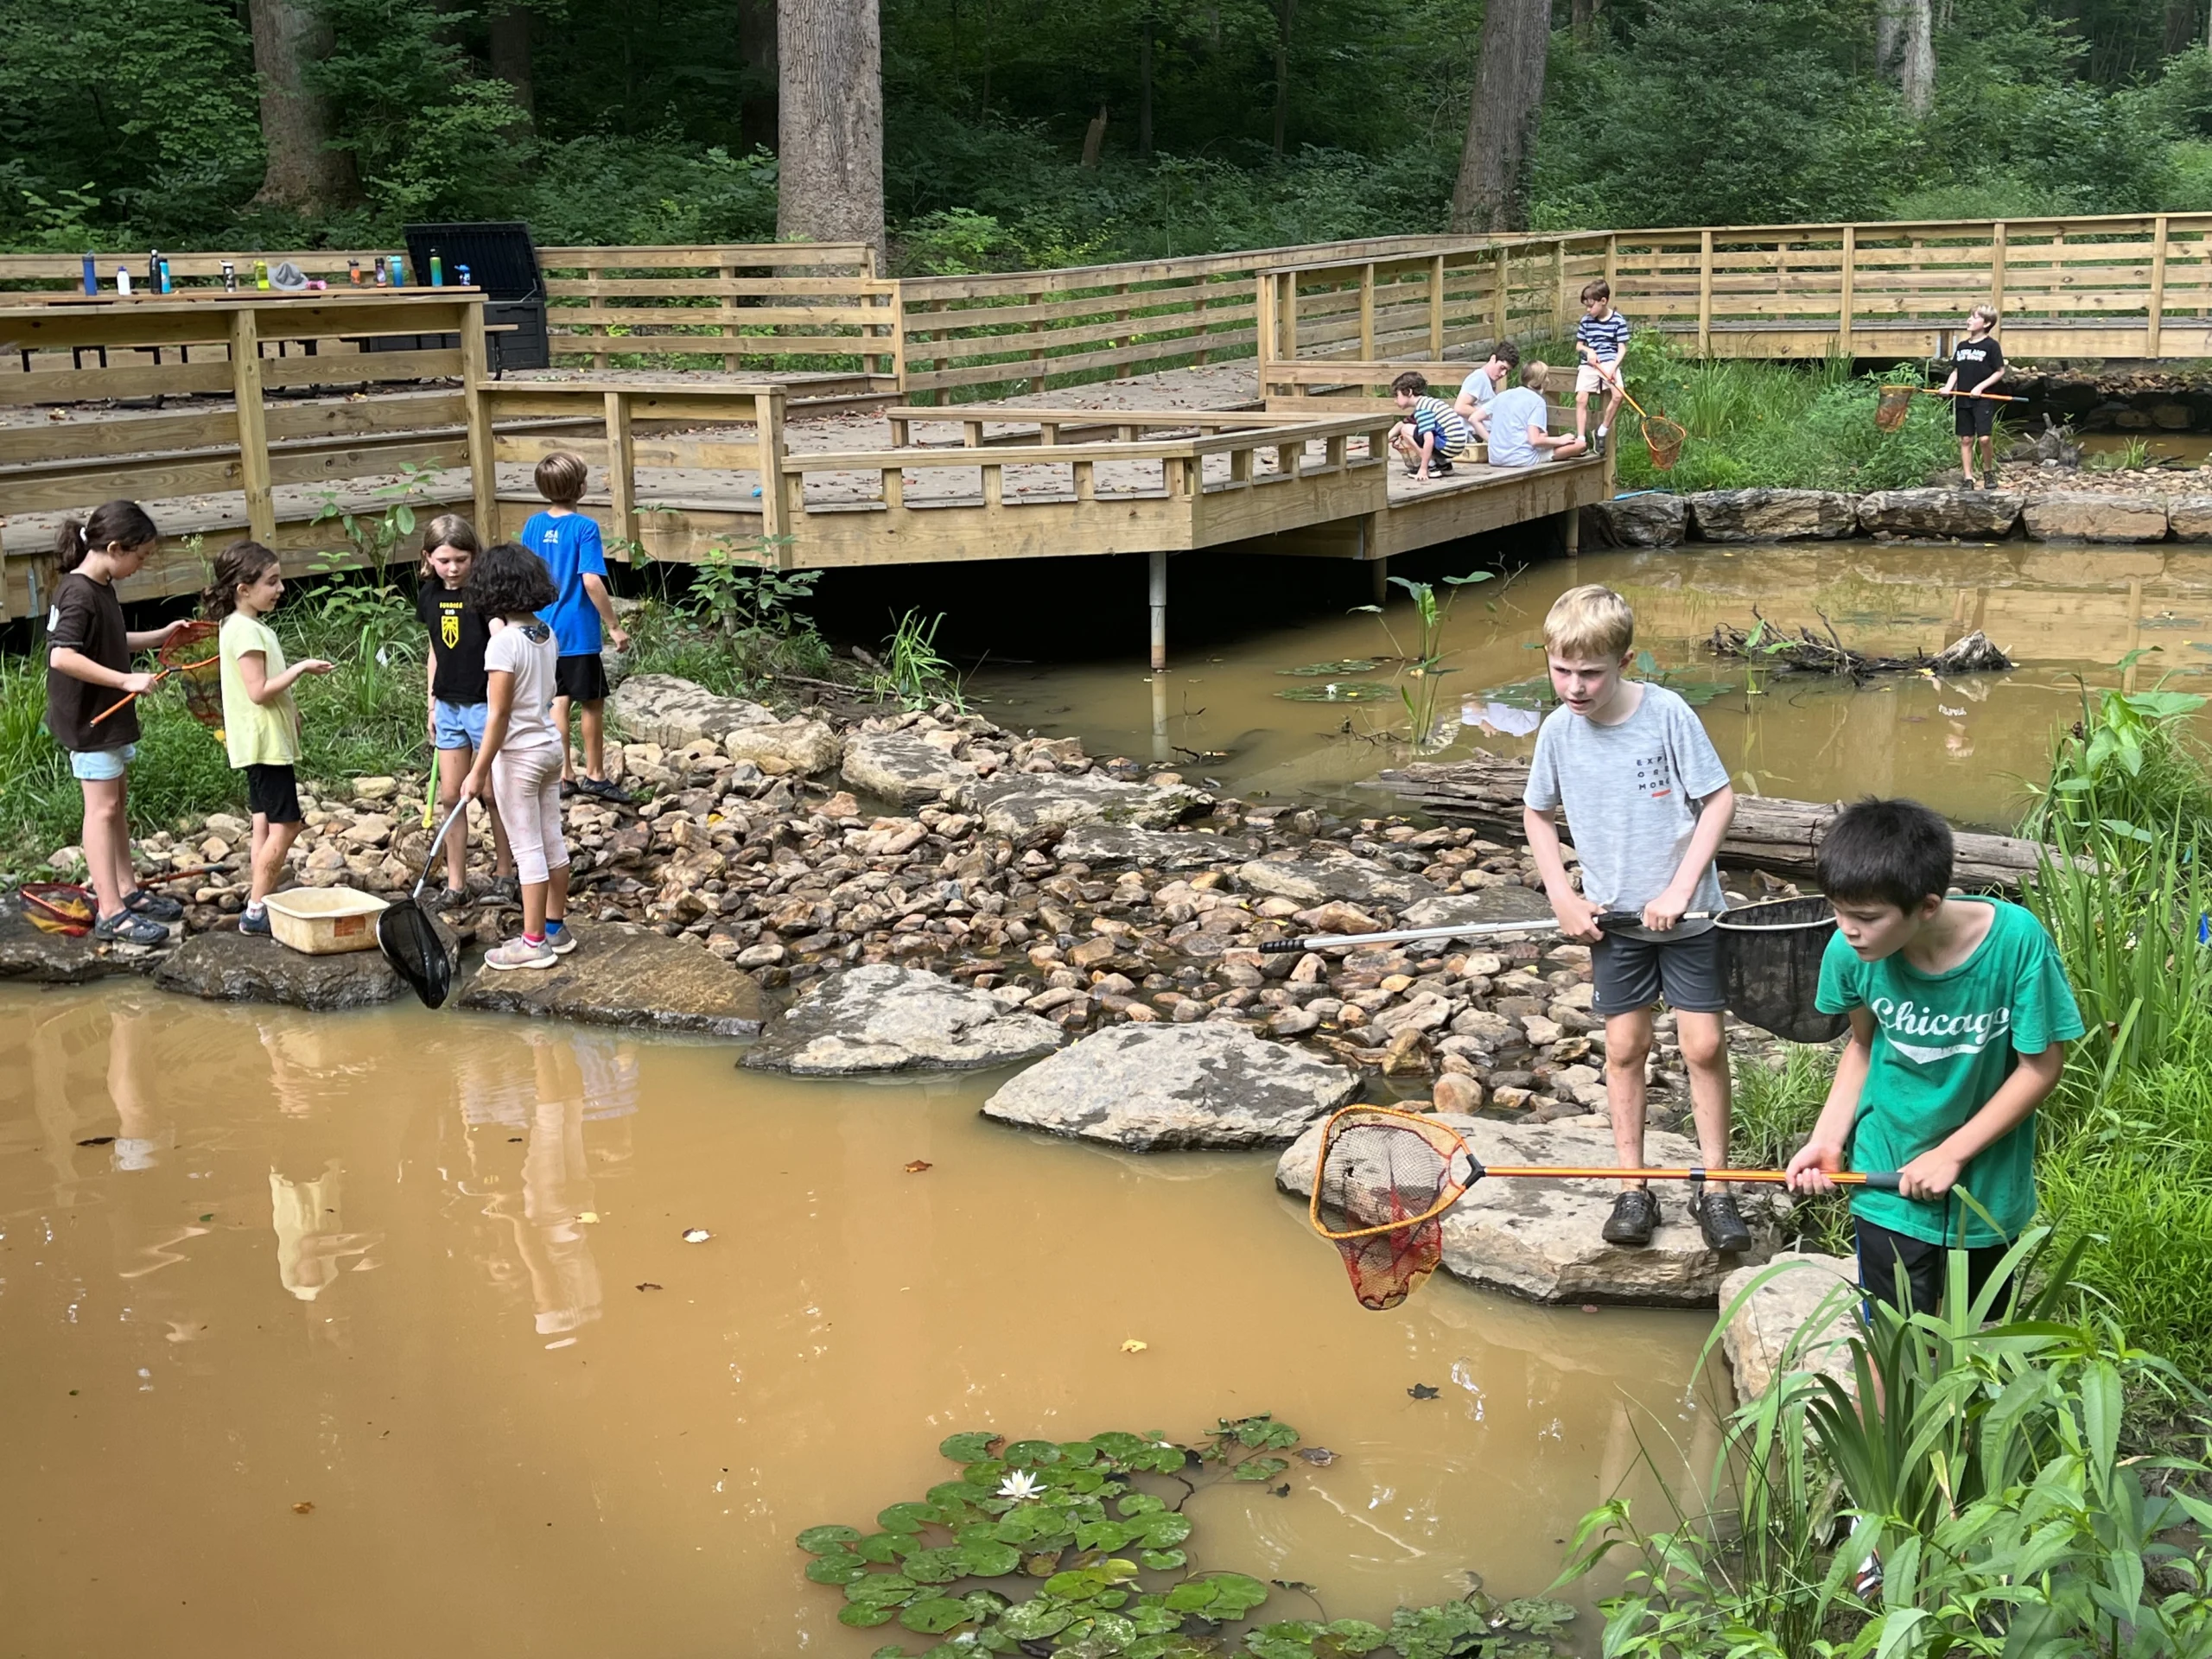 Children stand solo and in groupings around a pond. There is a wooden deck, lush green vegetation, and large rocks for the kids to stand on. A boy in the foreground holds a dip net to look for aquatic insects in the pond.